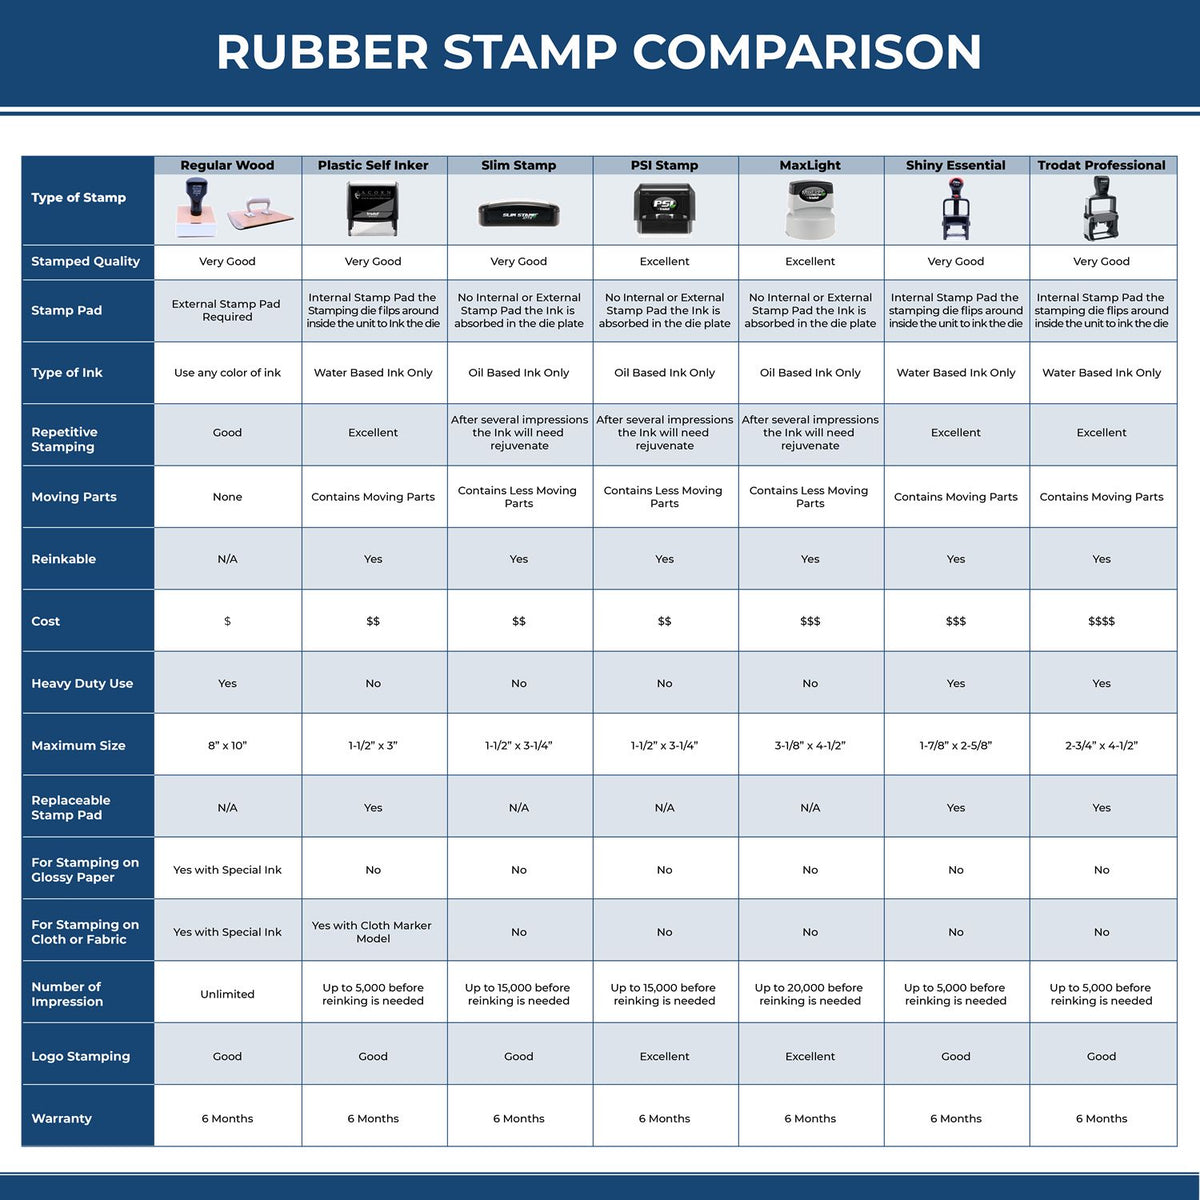 Large Self-Inking Stop Covid Patient Stamp 4995S Rubber Stamp Comparison